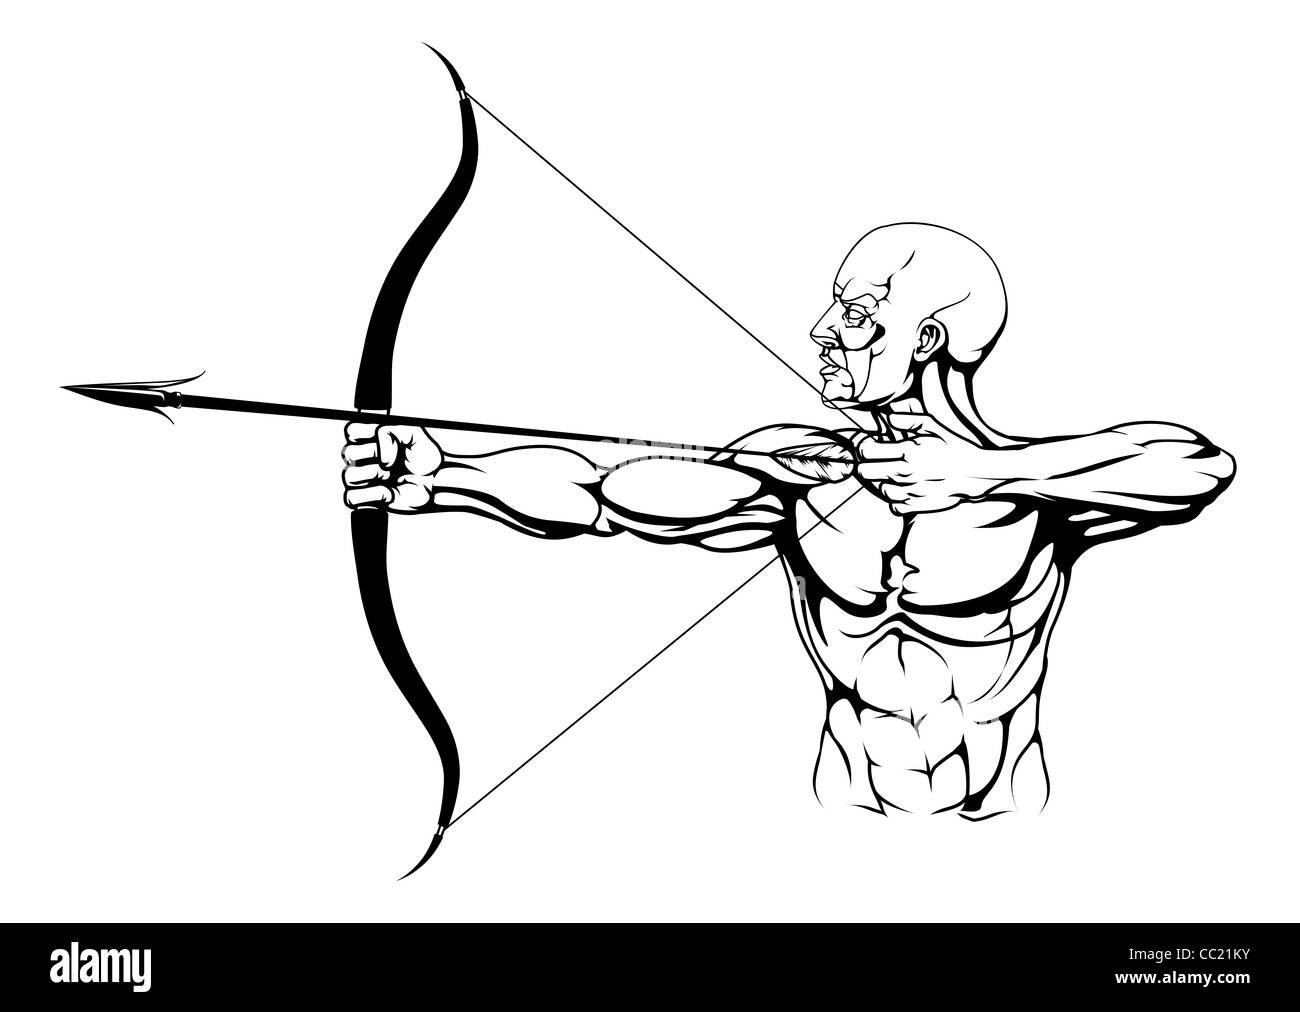 Cartoon stick man drawing illustration of sport archer in shooting pose  with bow and arrow shooting successfully at target. Stock Vector | Adobe  Stock